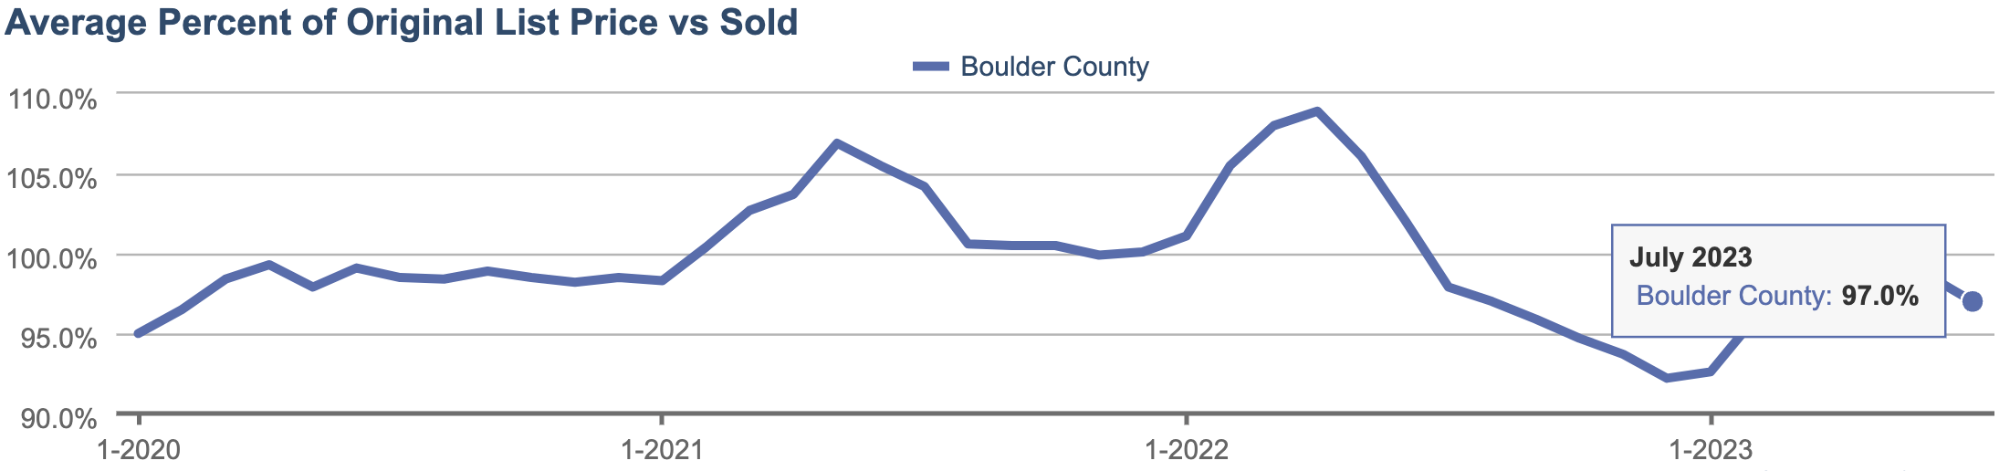 Average Percent of Original List Price When Sold in Boulder County Since 2020